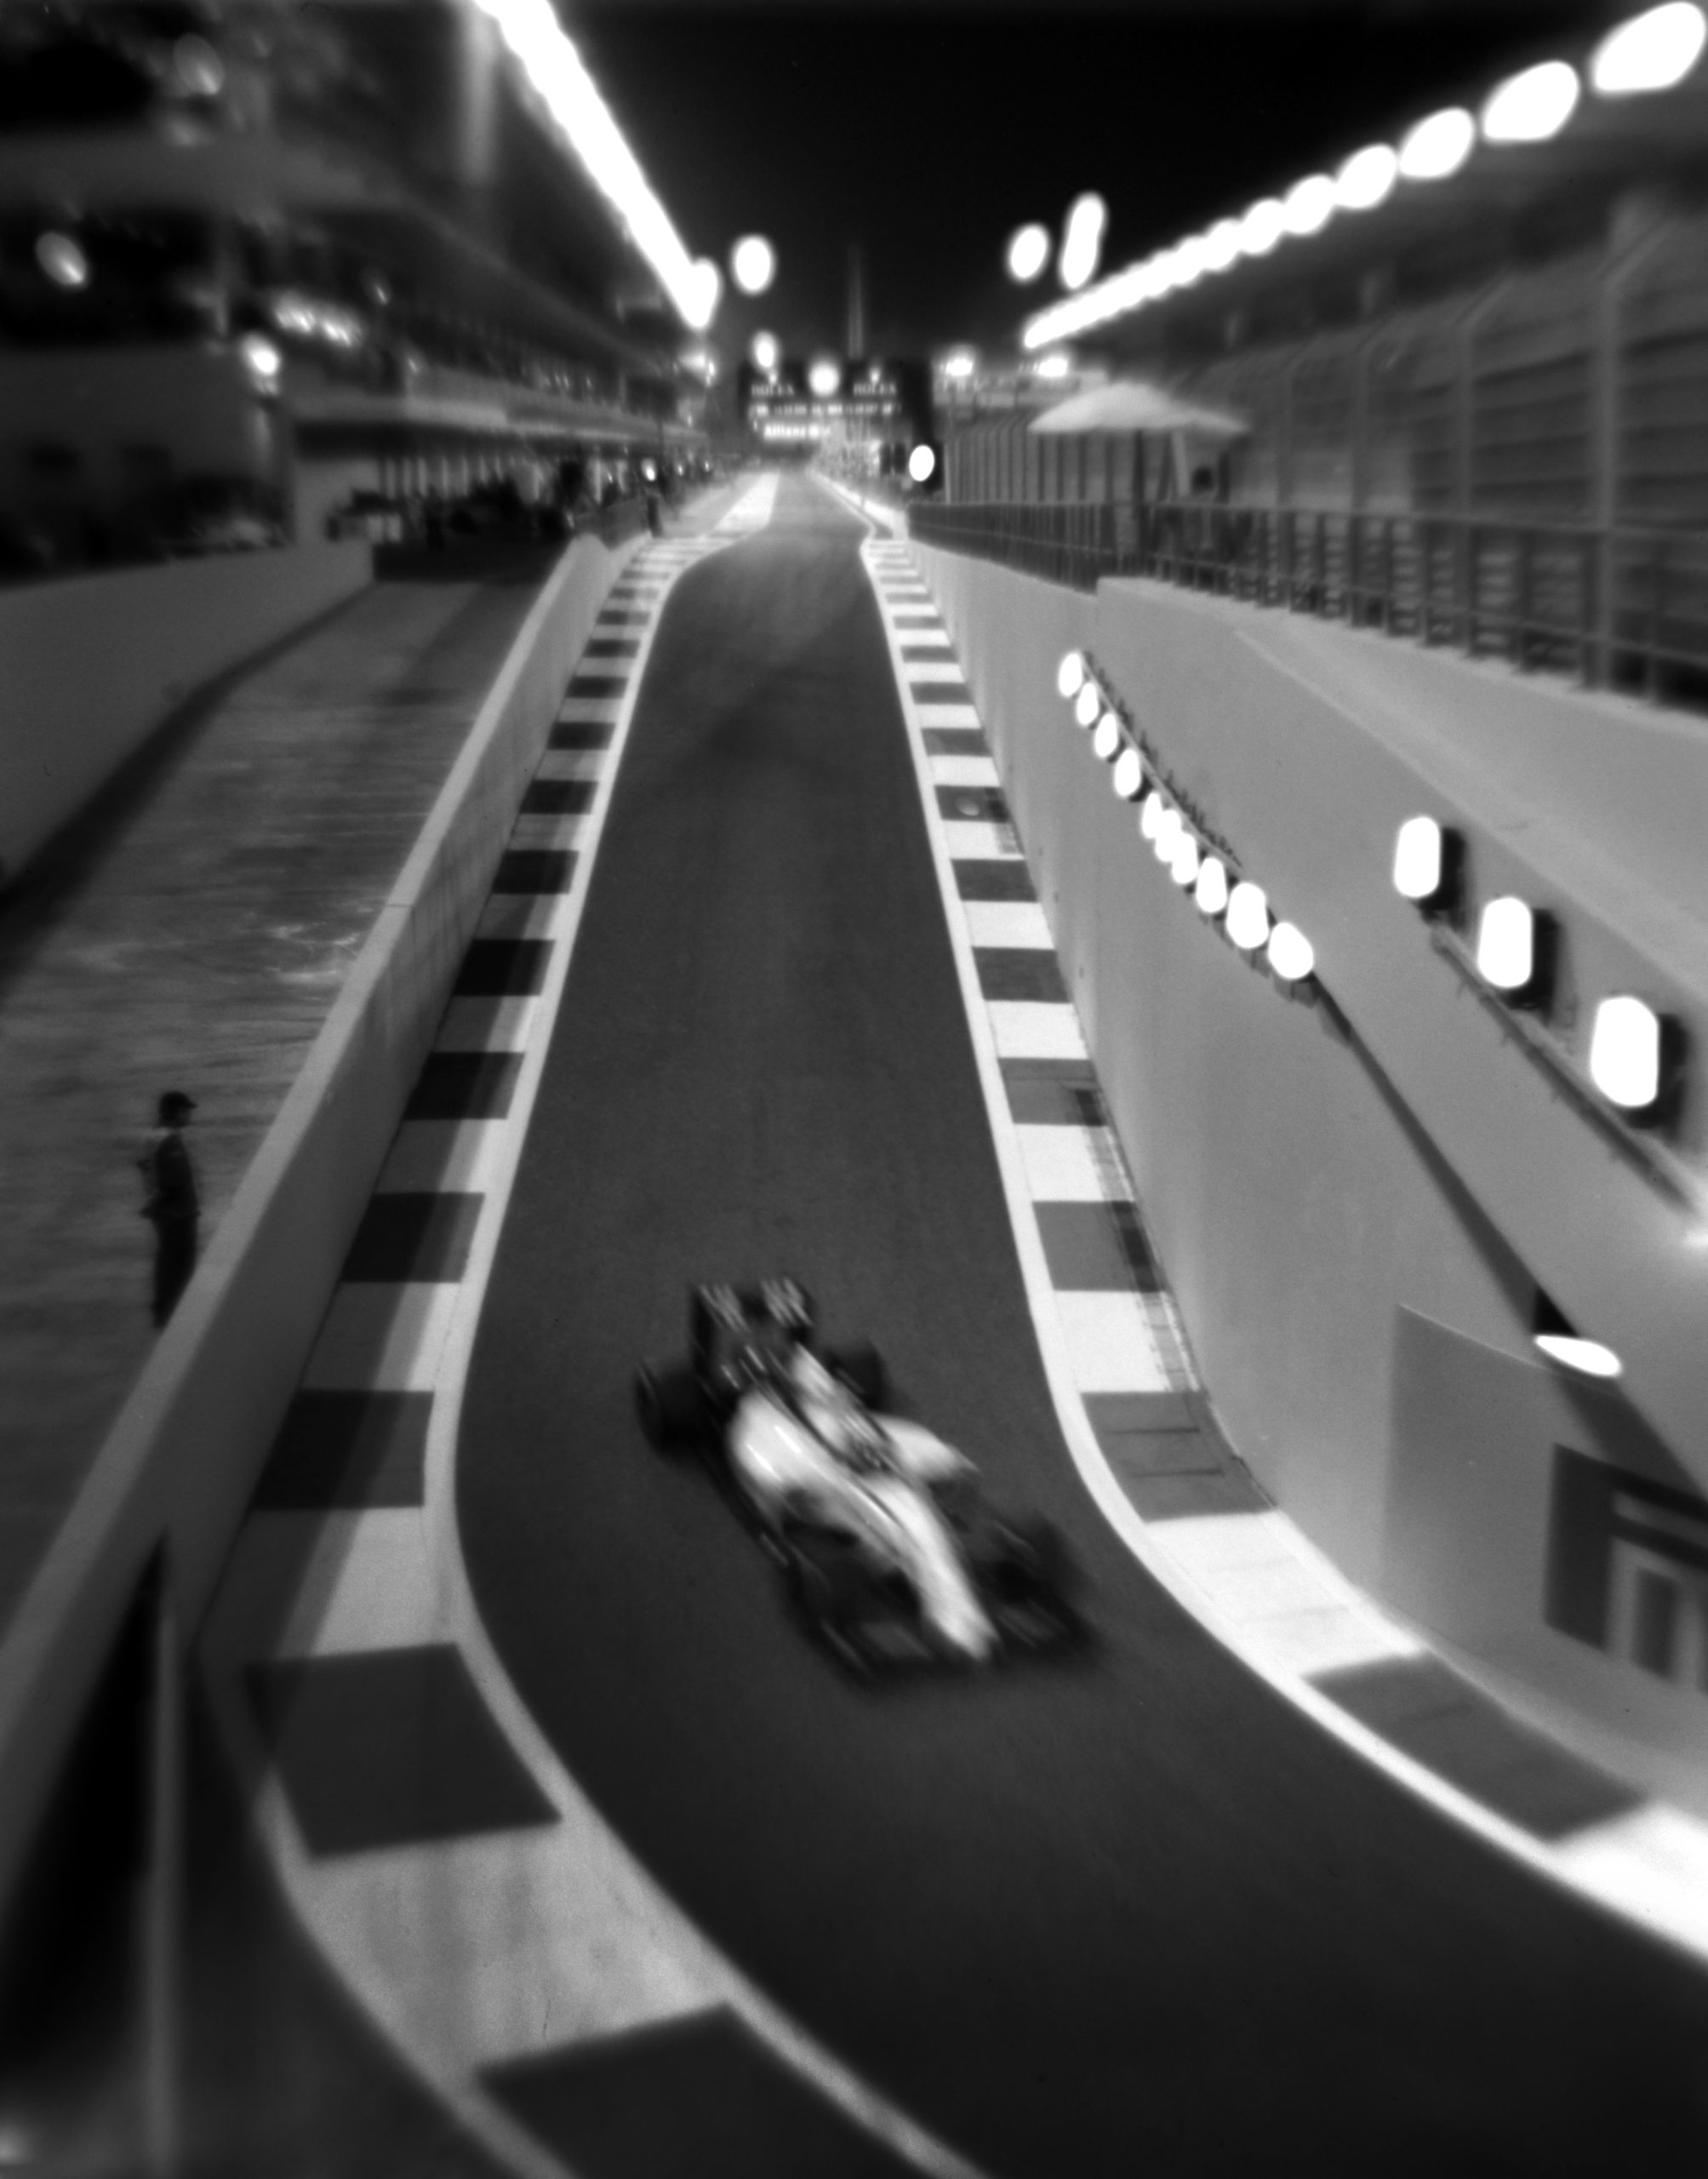 This Photographer Shoots 370km/h Formula One Cars On A Camera From 1913